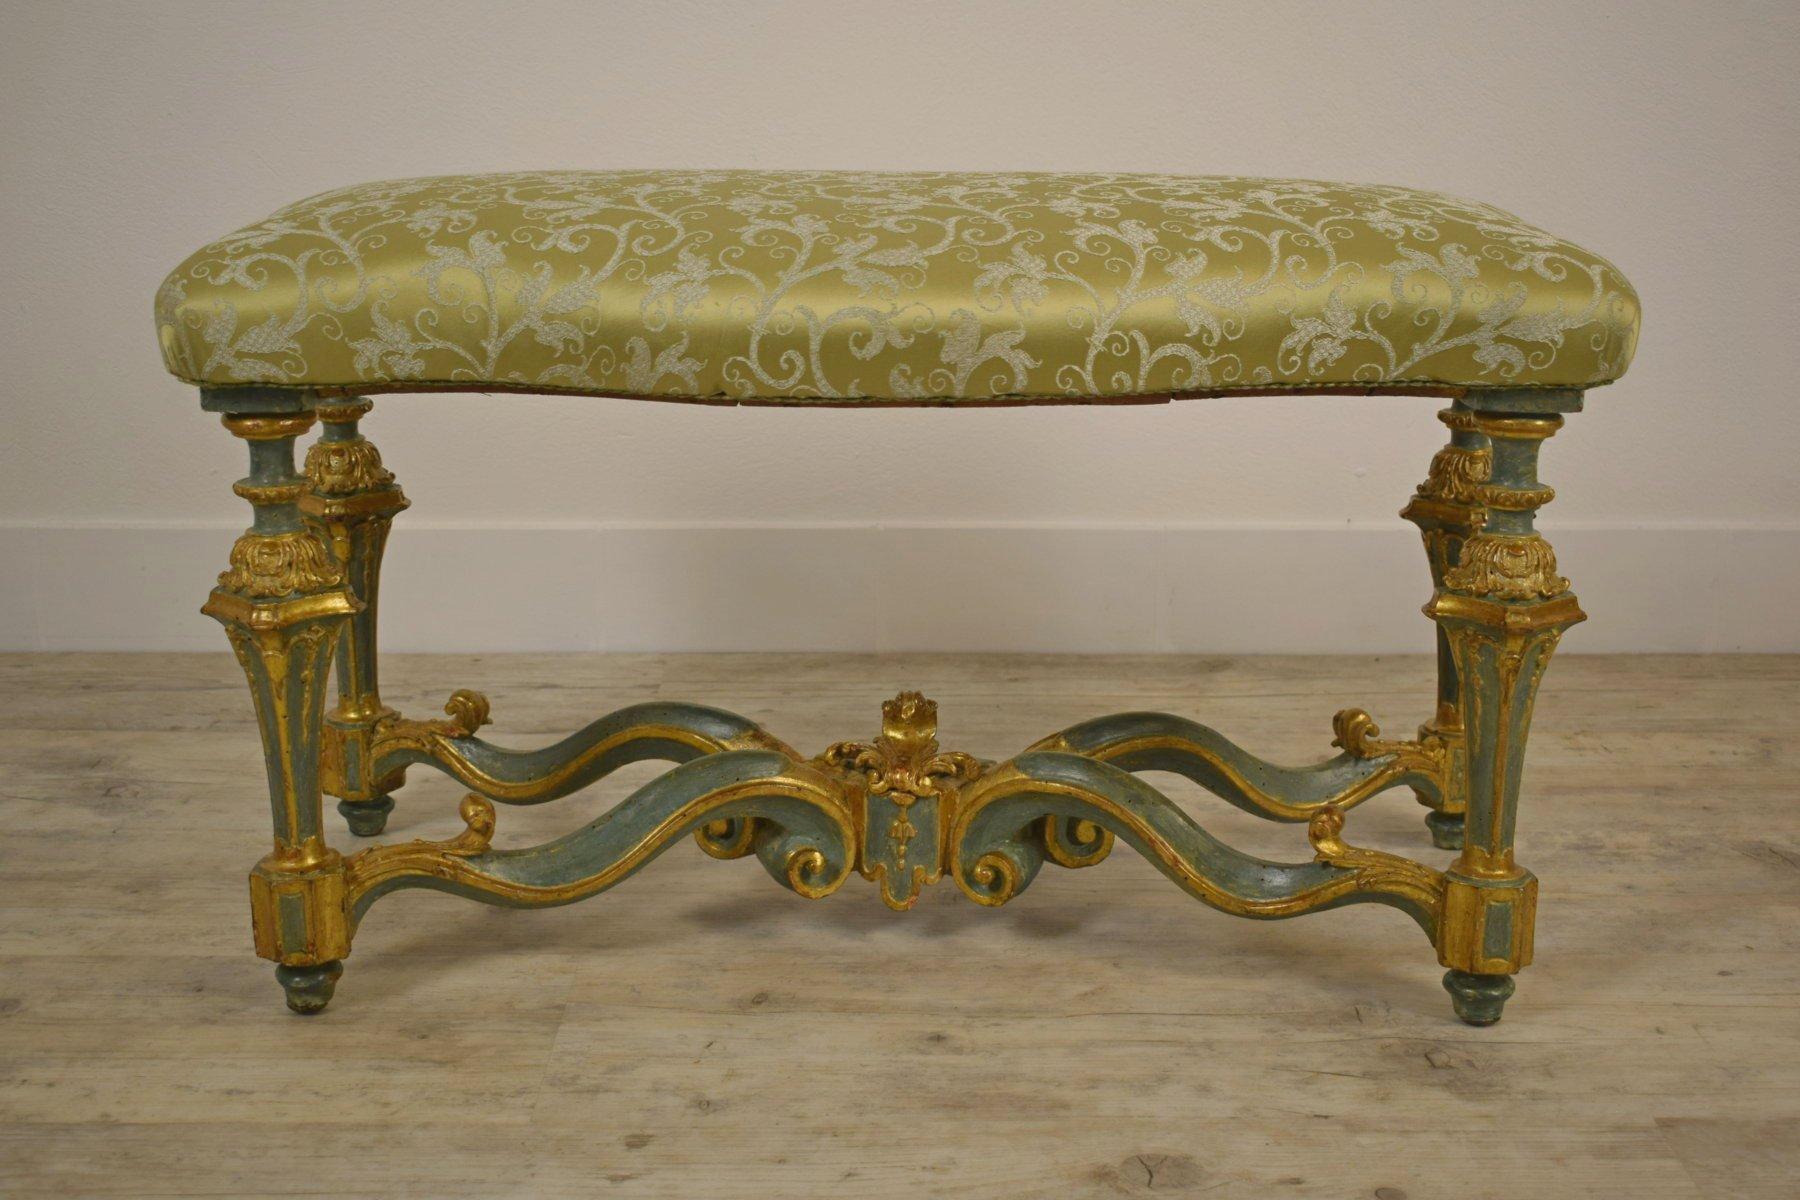 Italian 18th Century, Venetian lacquered and giltwood bench